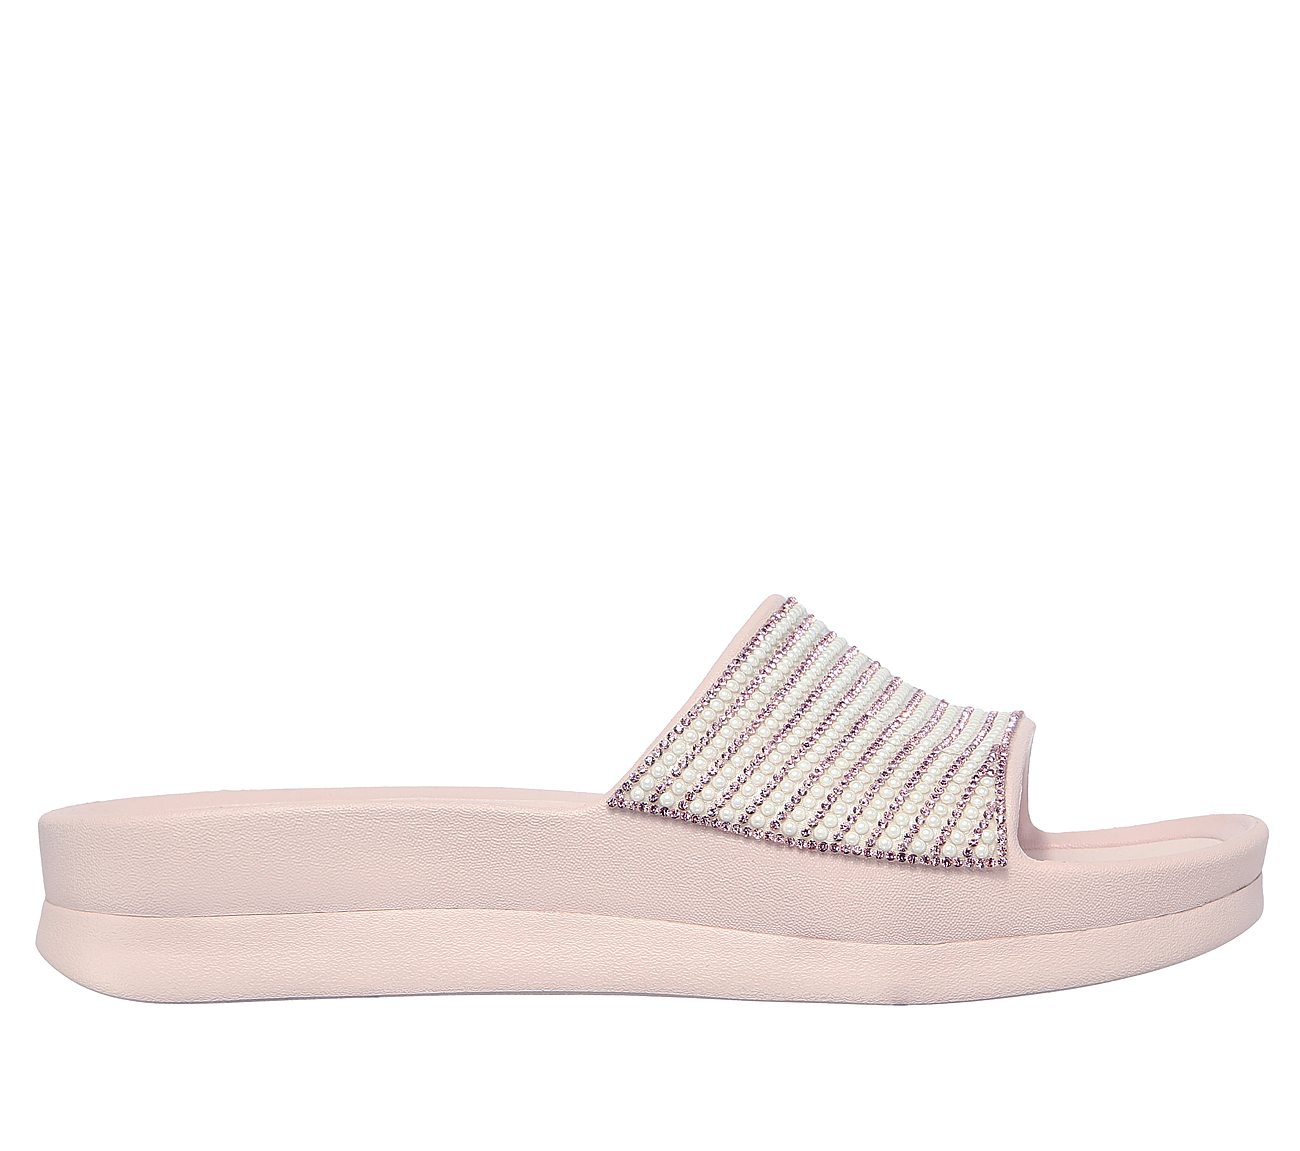 CALI CHARM - BE FANCY, BLUSH Footwear Lateral View